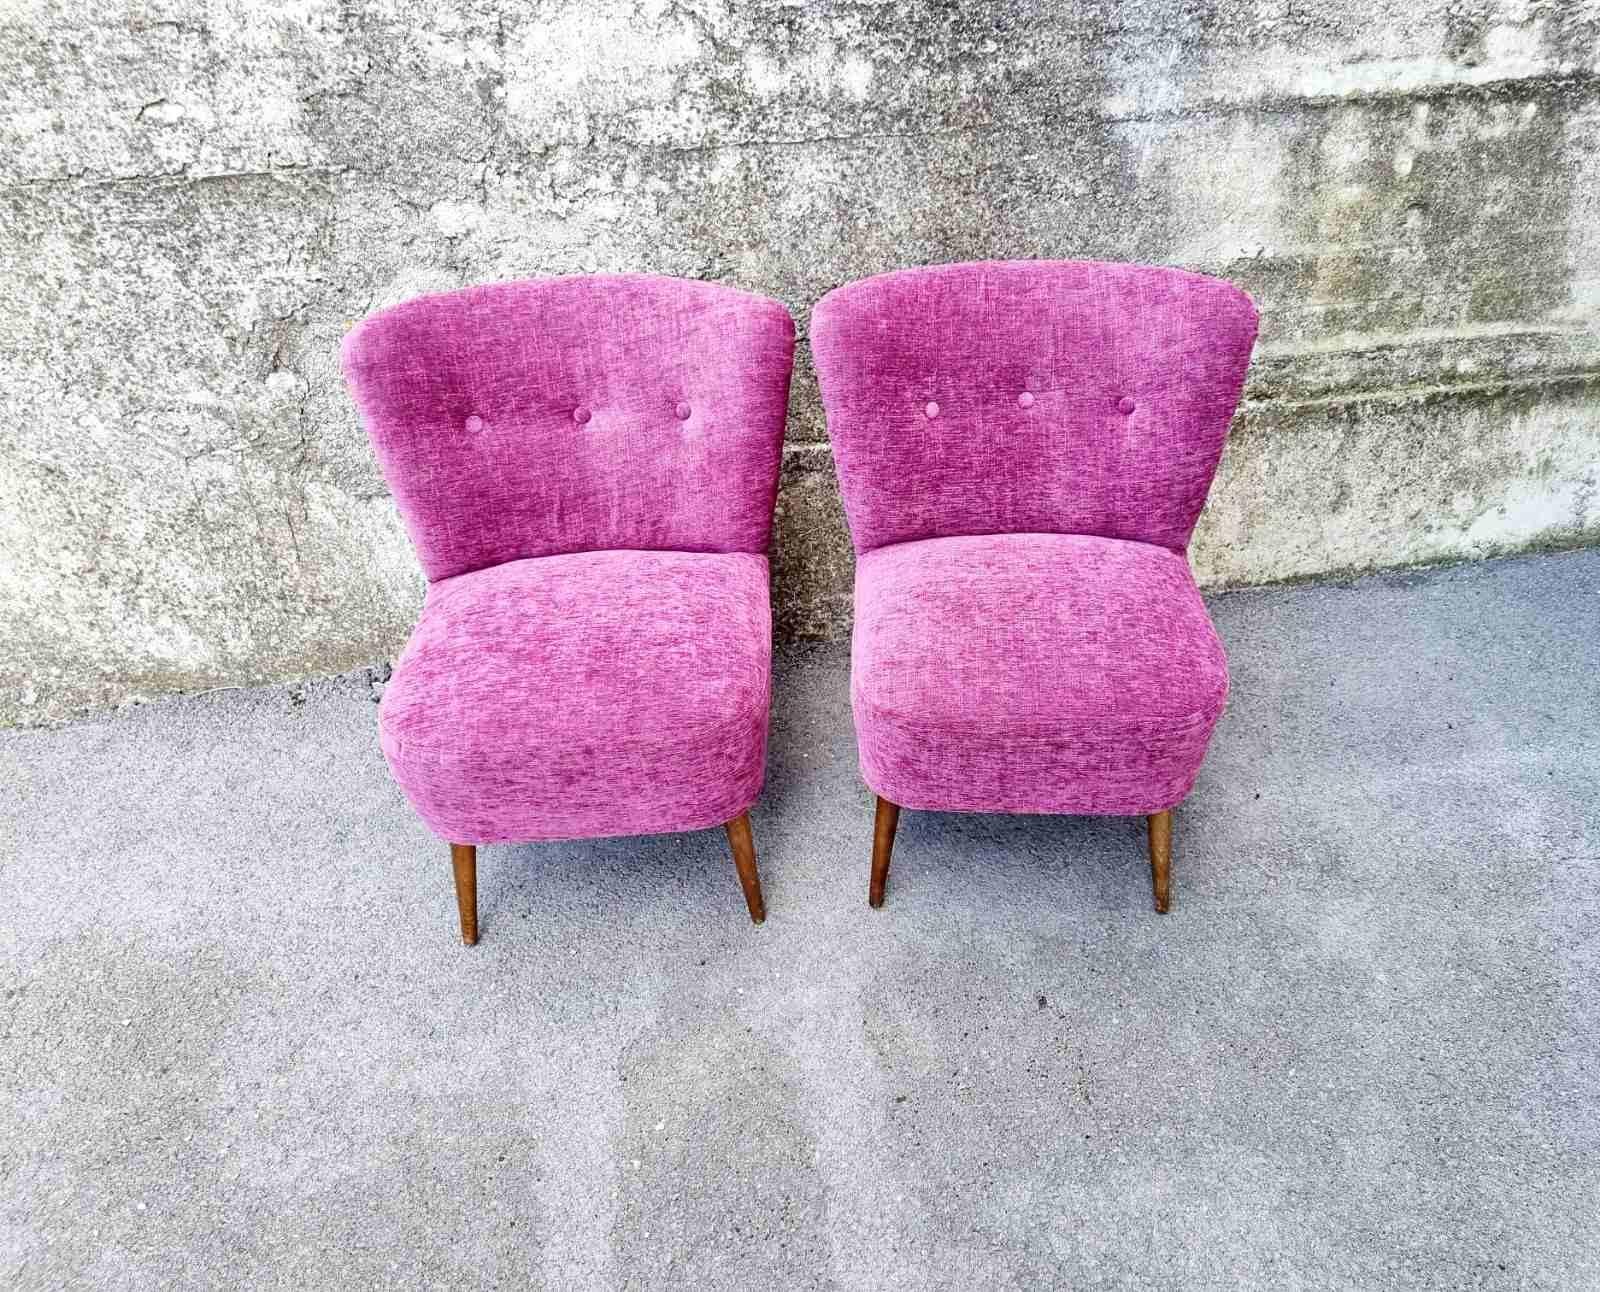 Pair of Midcentury Cocktail Chairs, Scandinavian Design, 60s For Sale 4